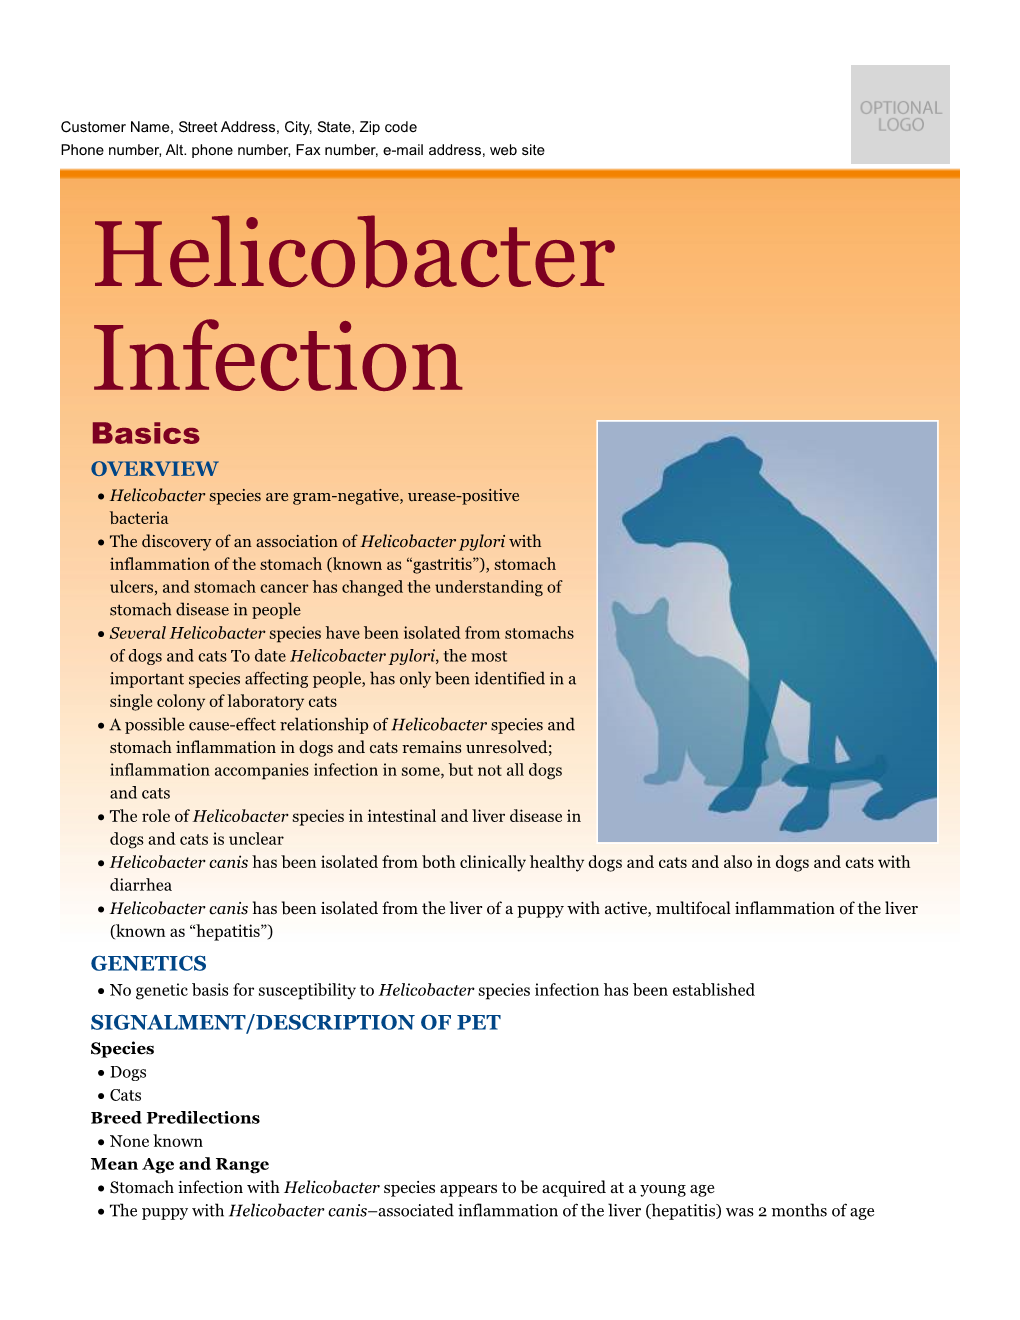 Helicobacter Infection